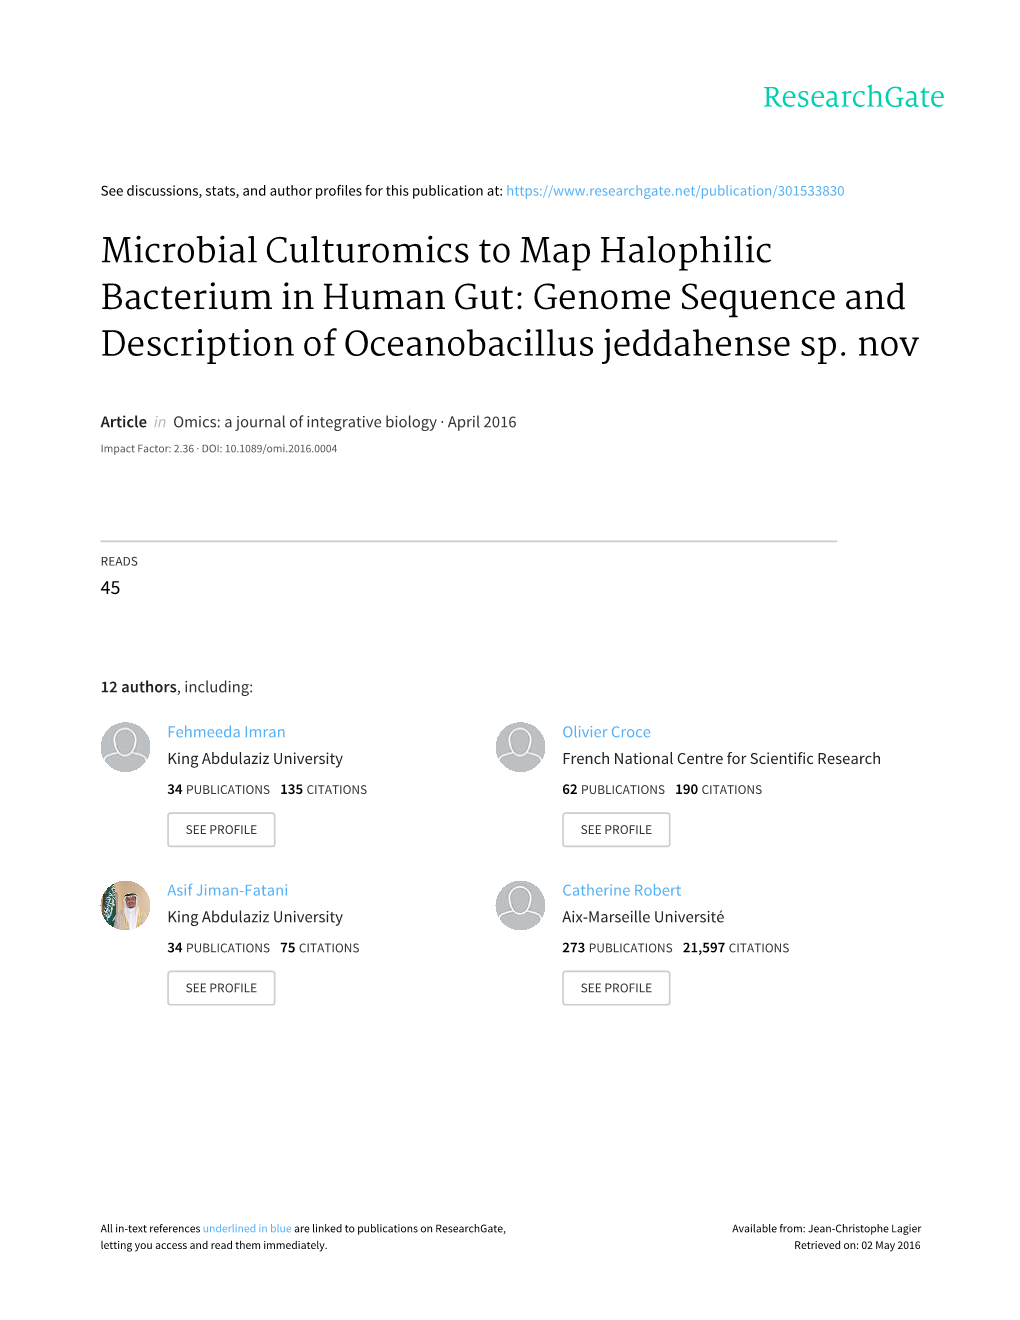 Microbial Culturomics to Map Halophilic Bacterium in Human Gut: Genome Sequence and Description of Oceanobacillus Jeddahense Sp